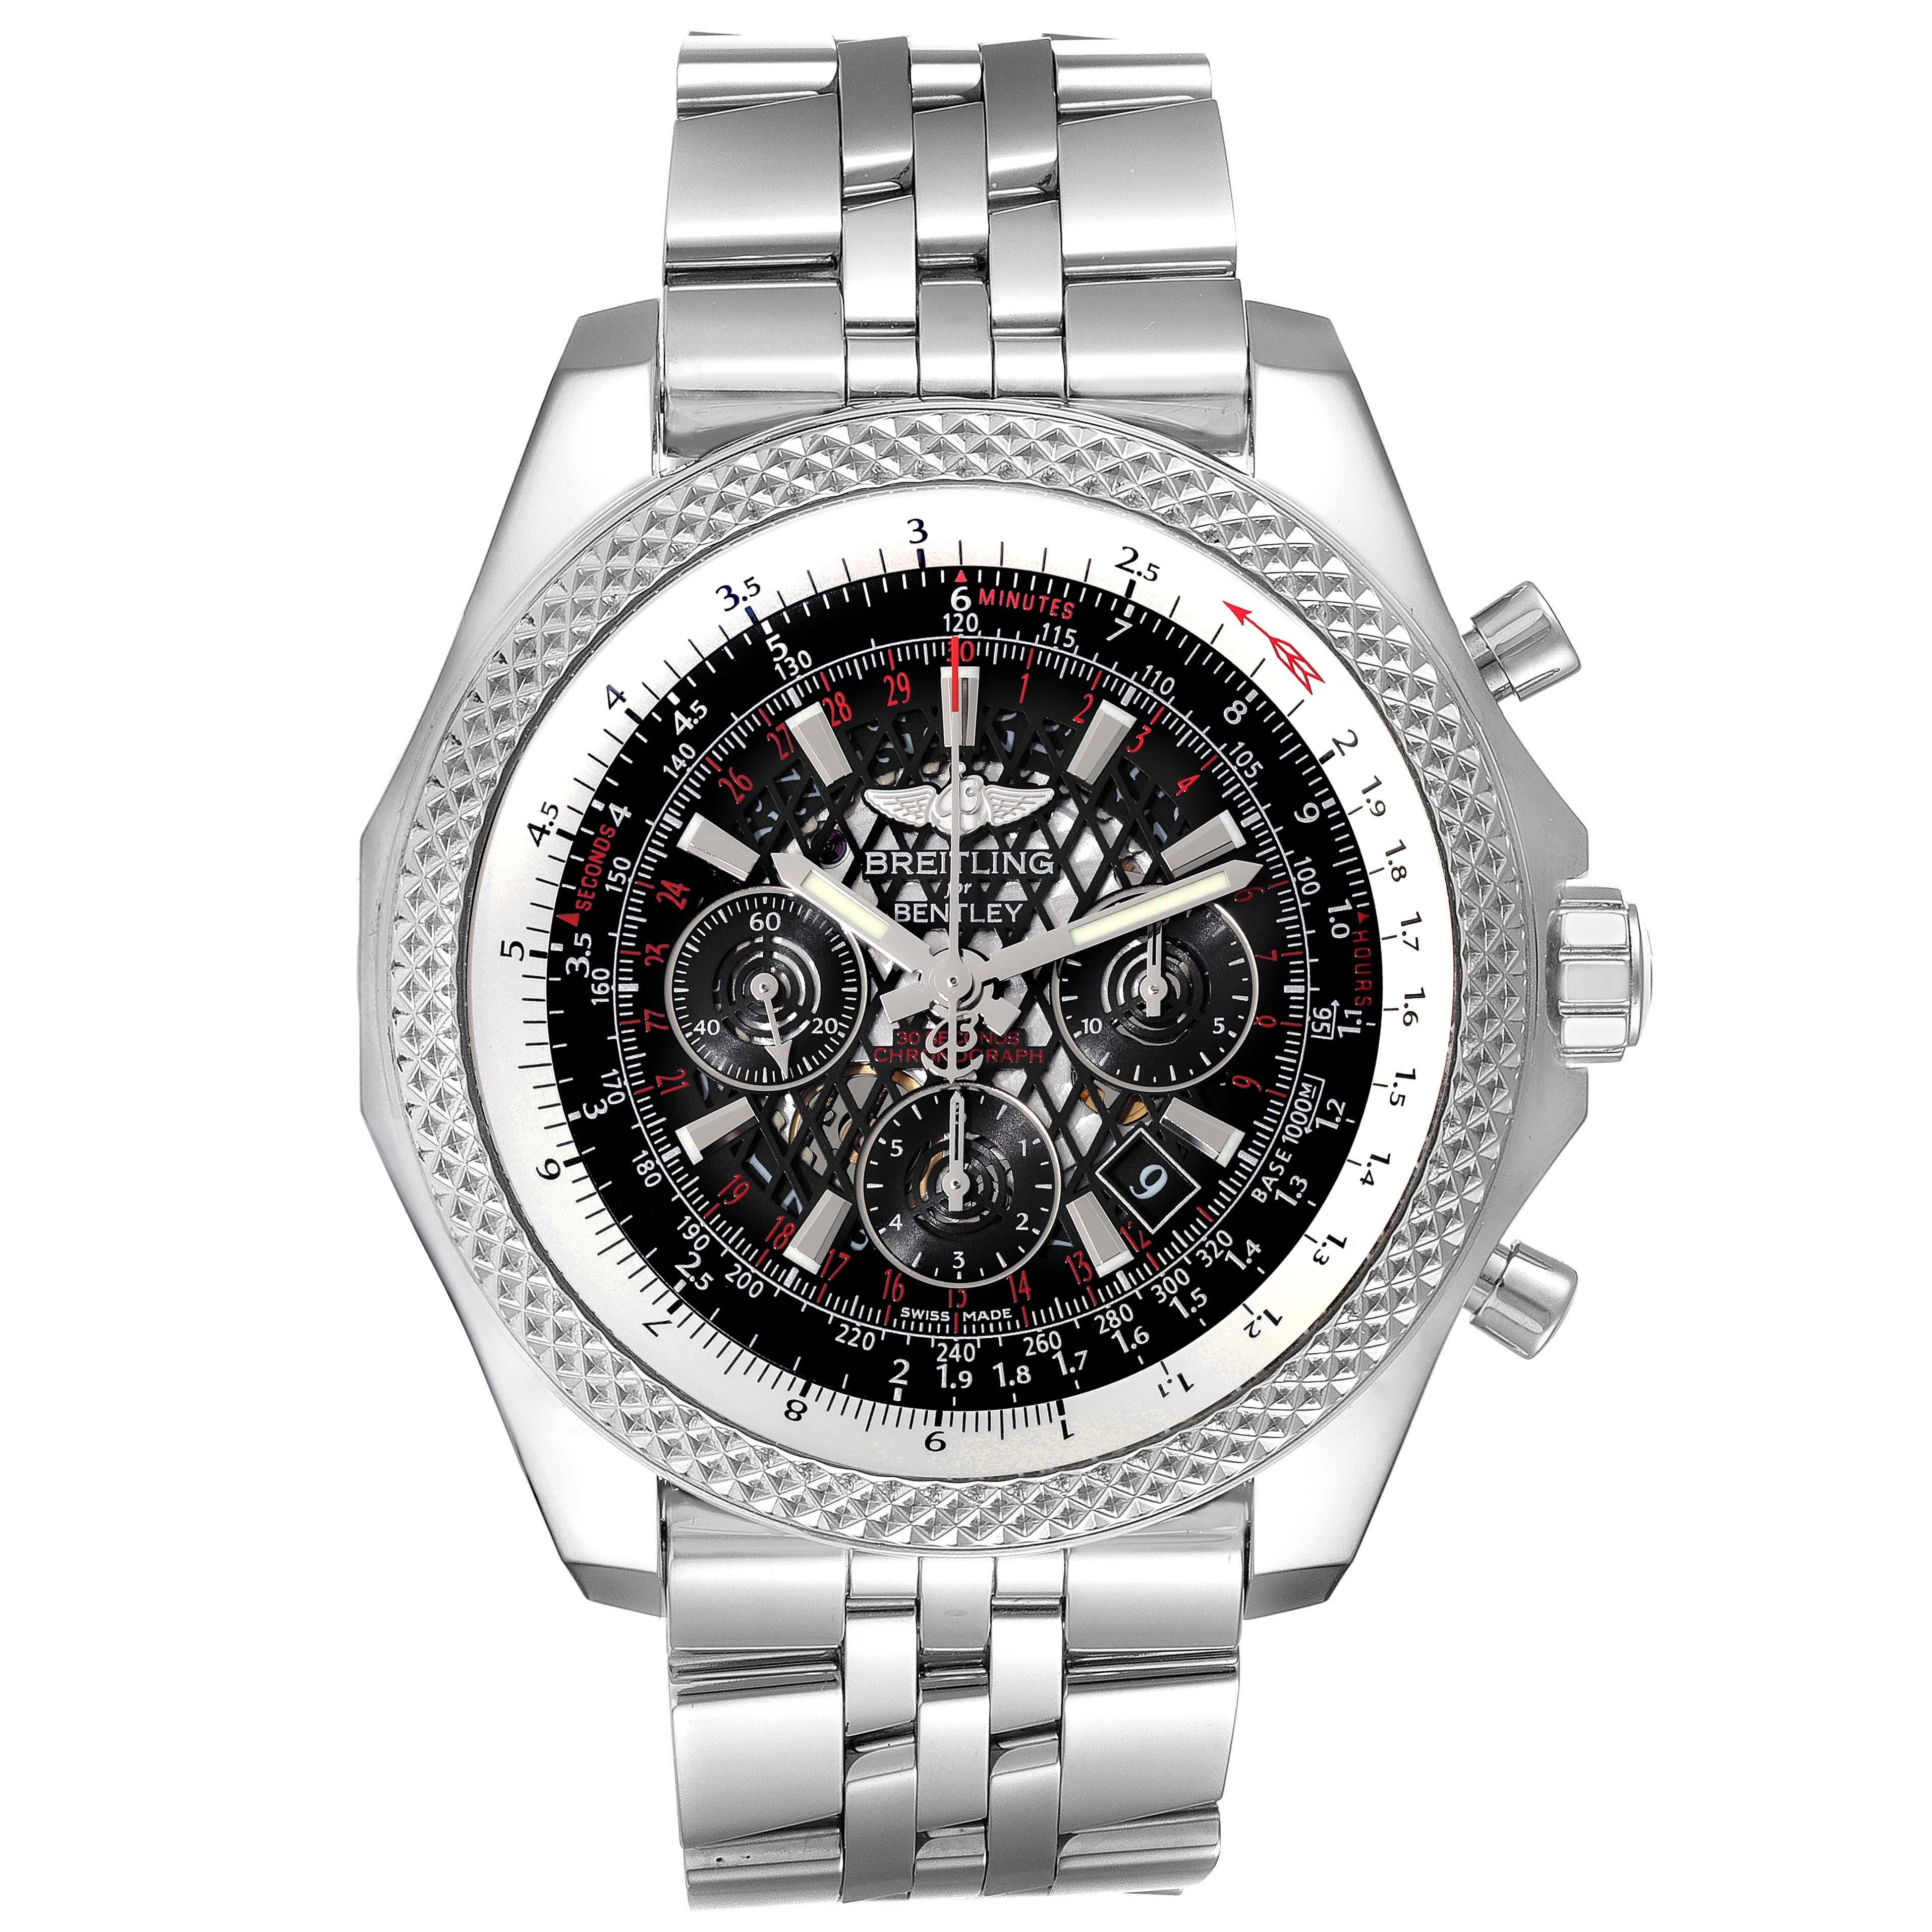 Breitling Bentley B06 Black Dial Chronograph Steel Mens Watch AB0611. Self-winding automatic officially certified chronometer movement. Chronograph function. Stainless steel case 49 mm in diameter. Stainless steel screwed-down crown and pushers.